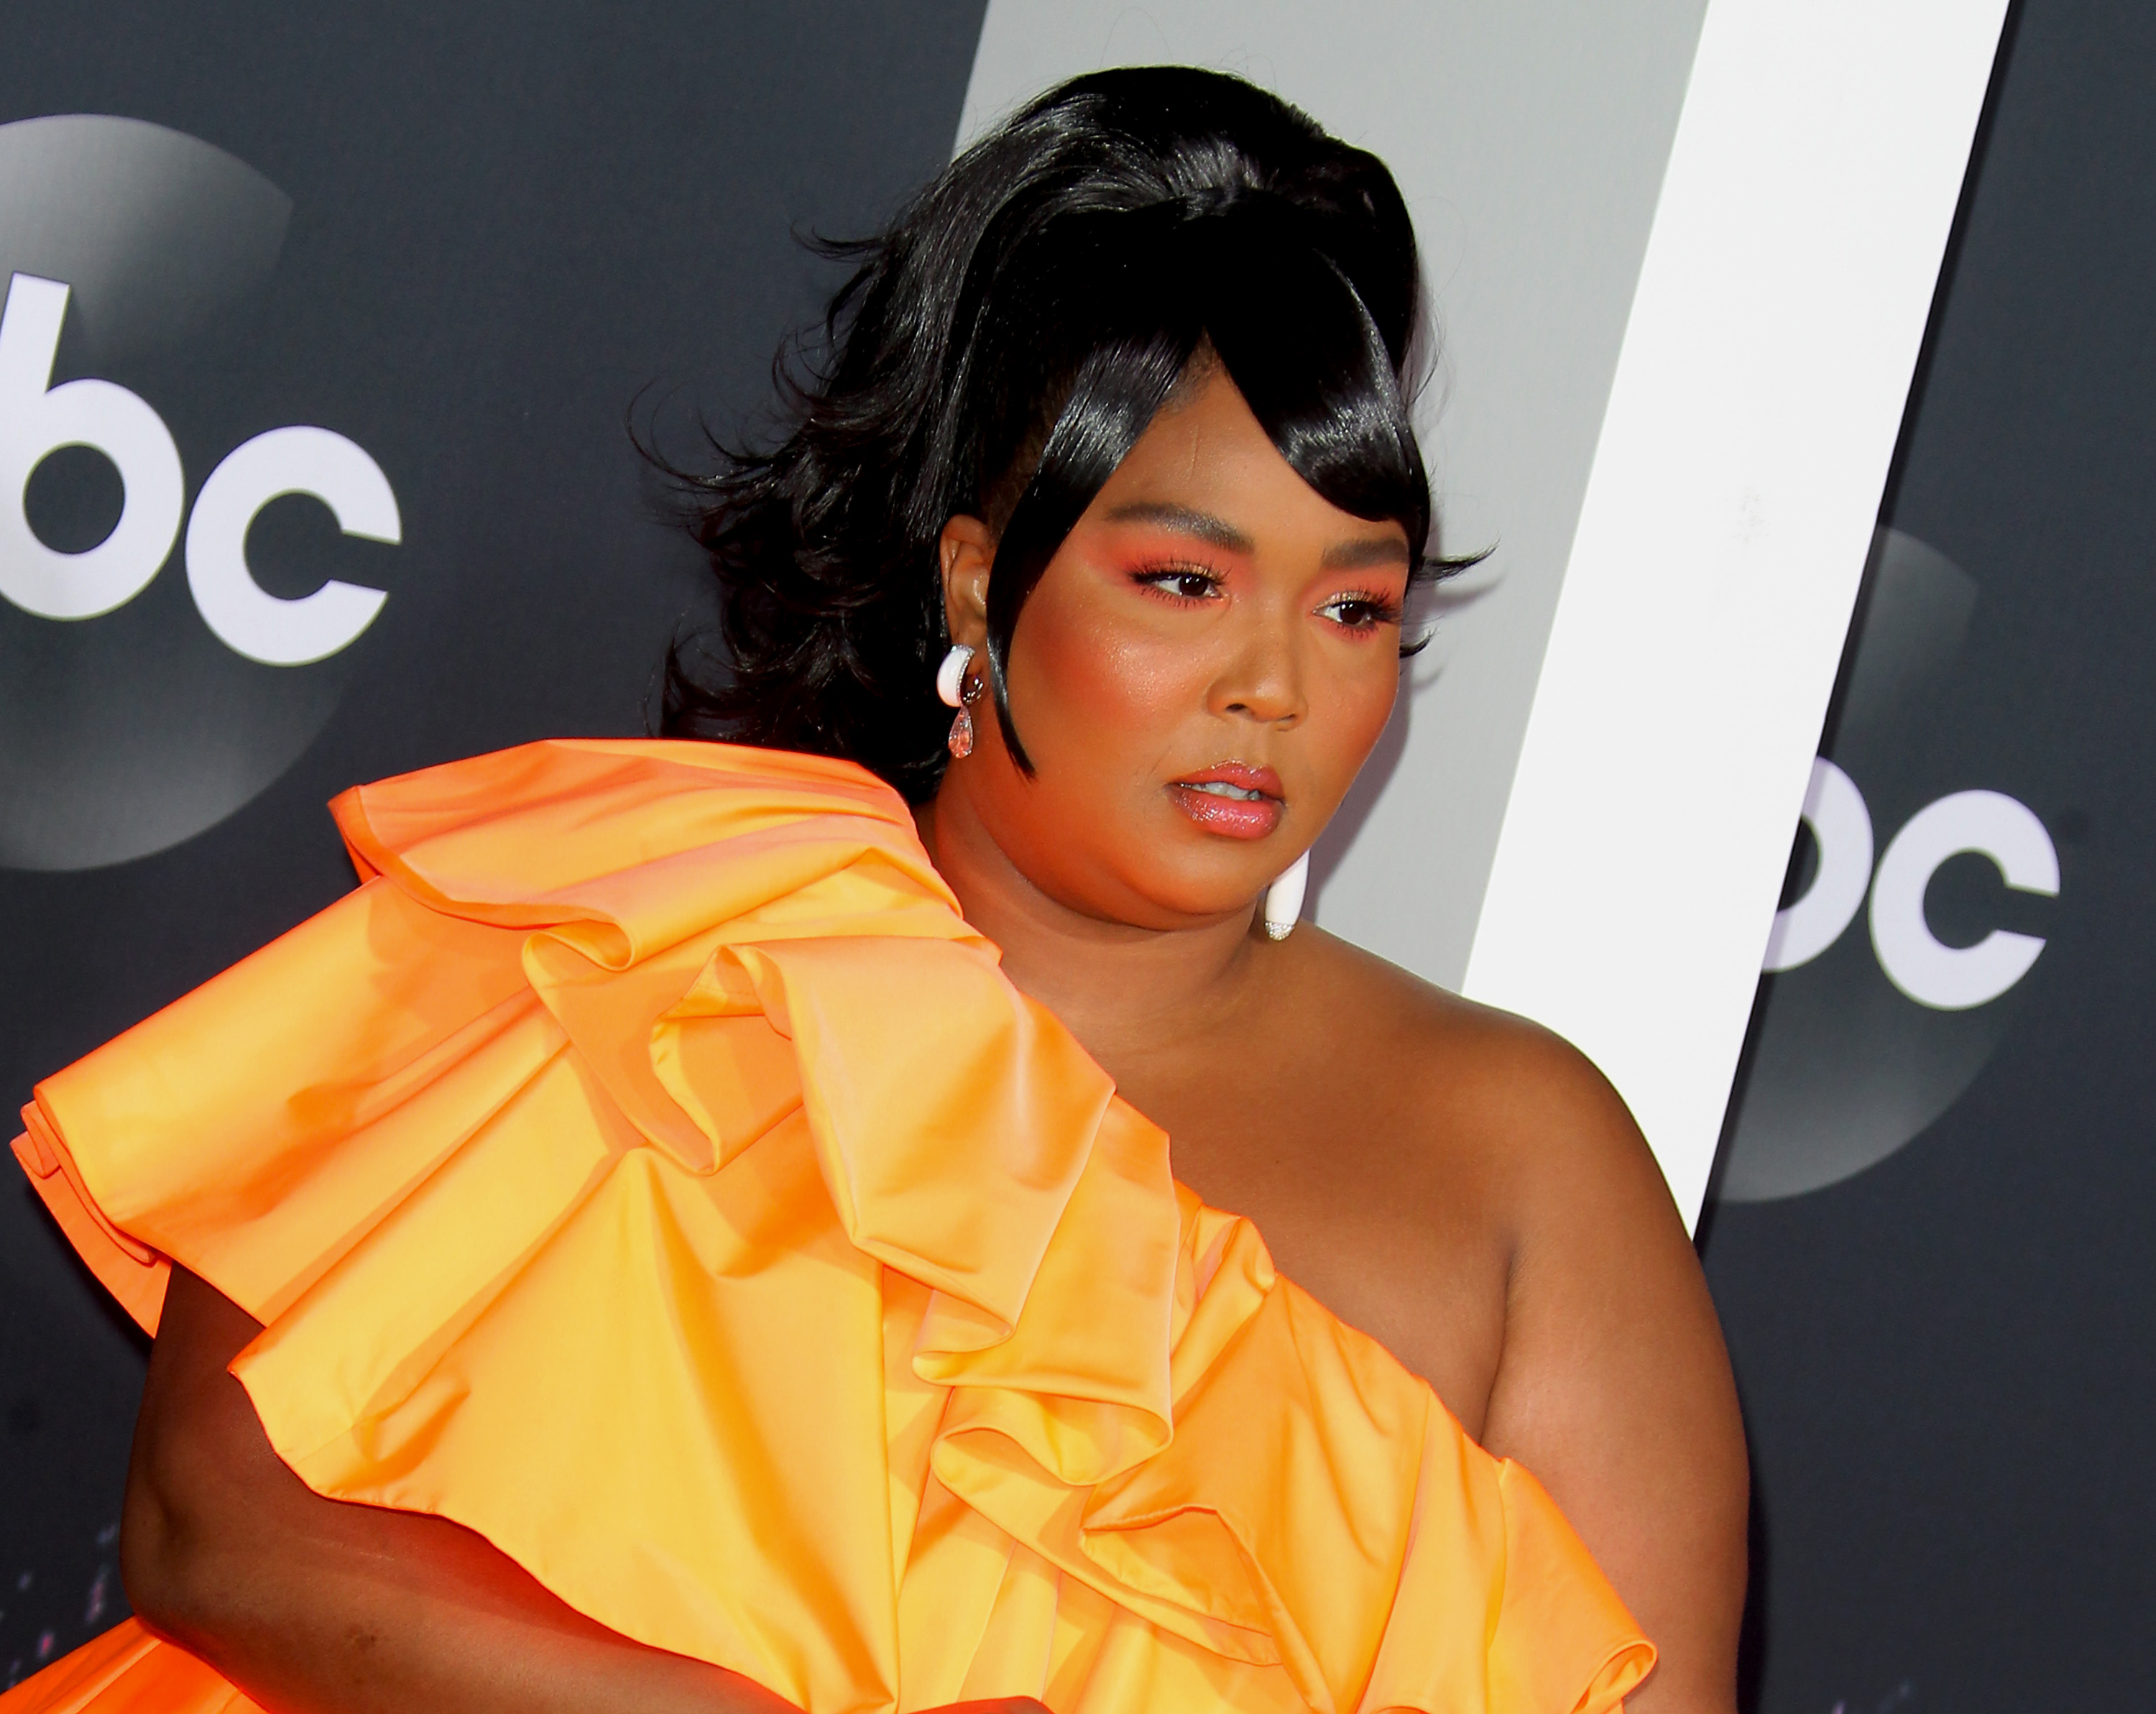 Lizzo's Red Carpet Tiny Purse Just Got Its Own Twitter